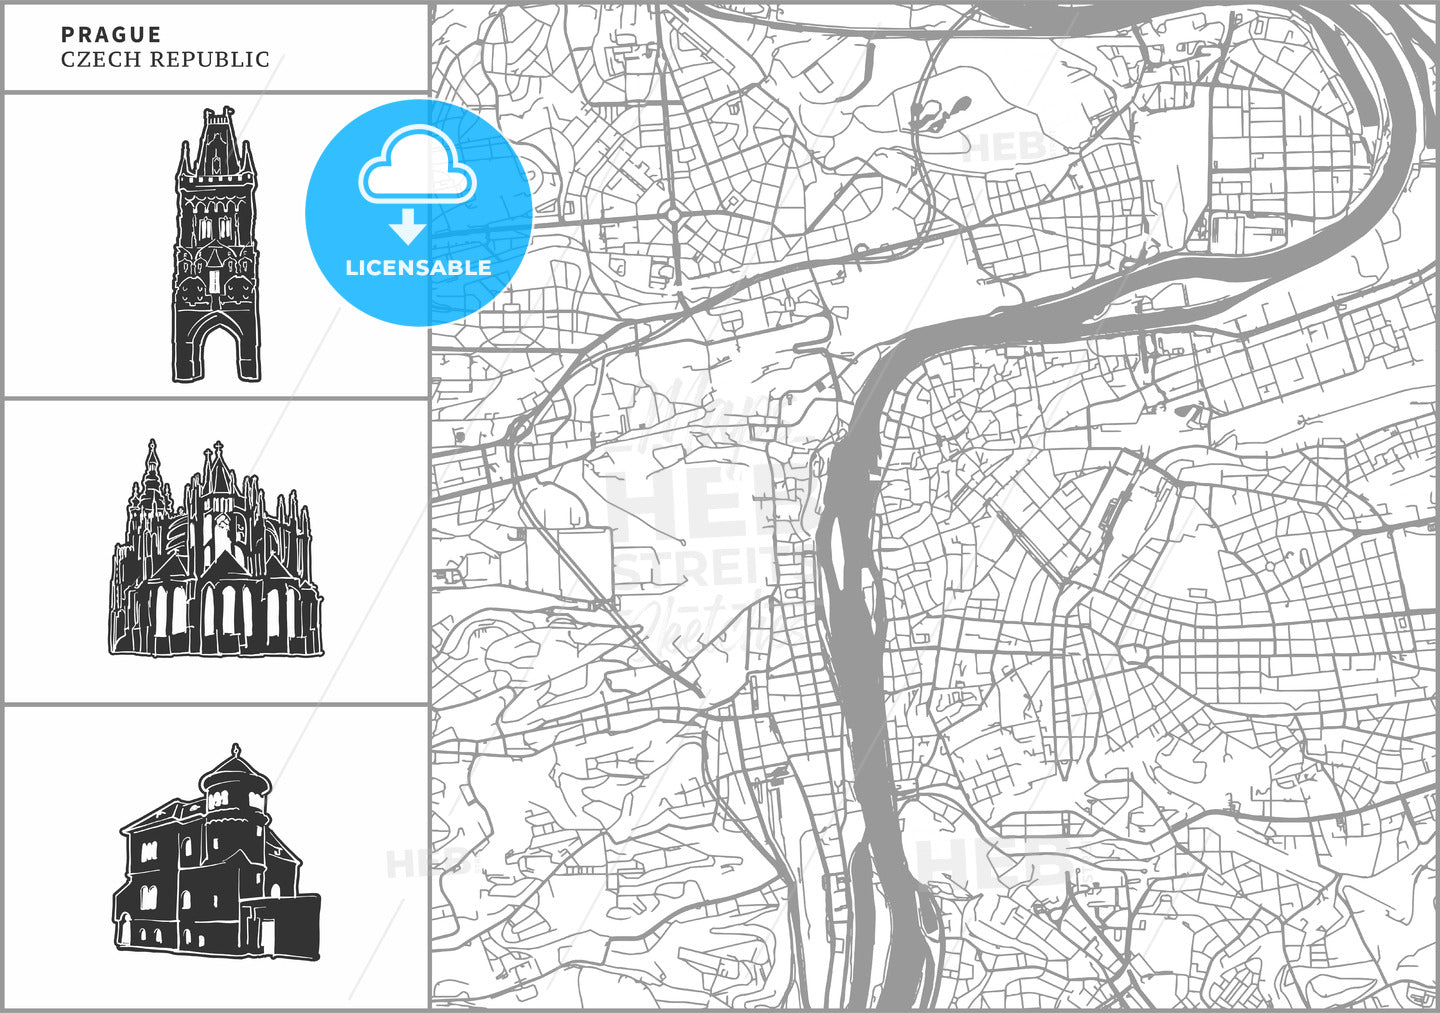 Prague city map with hand-drawn architecture icons